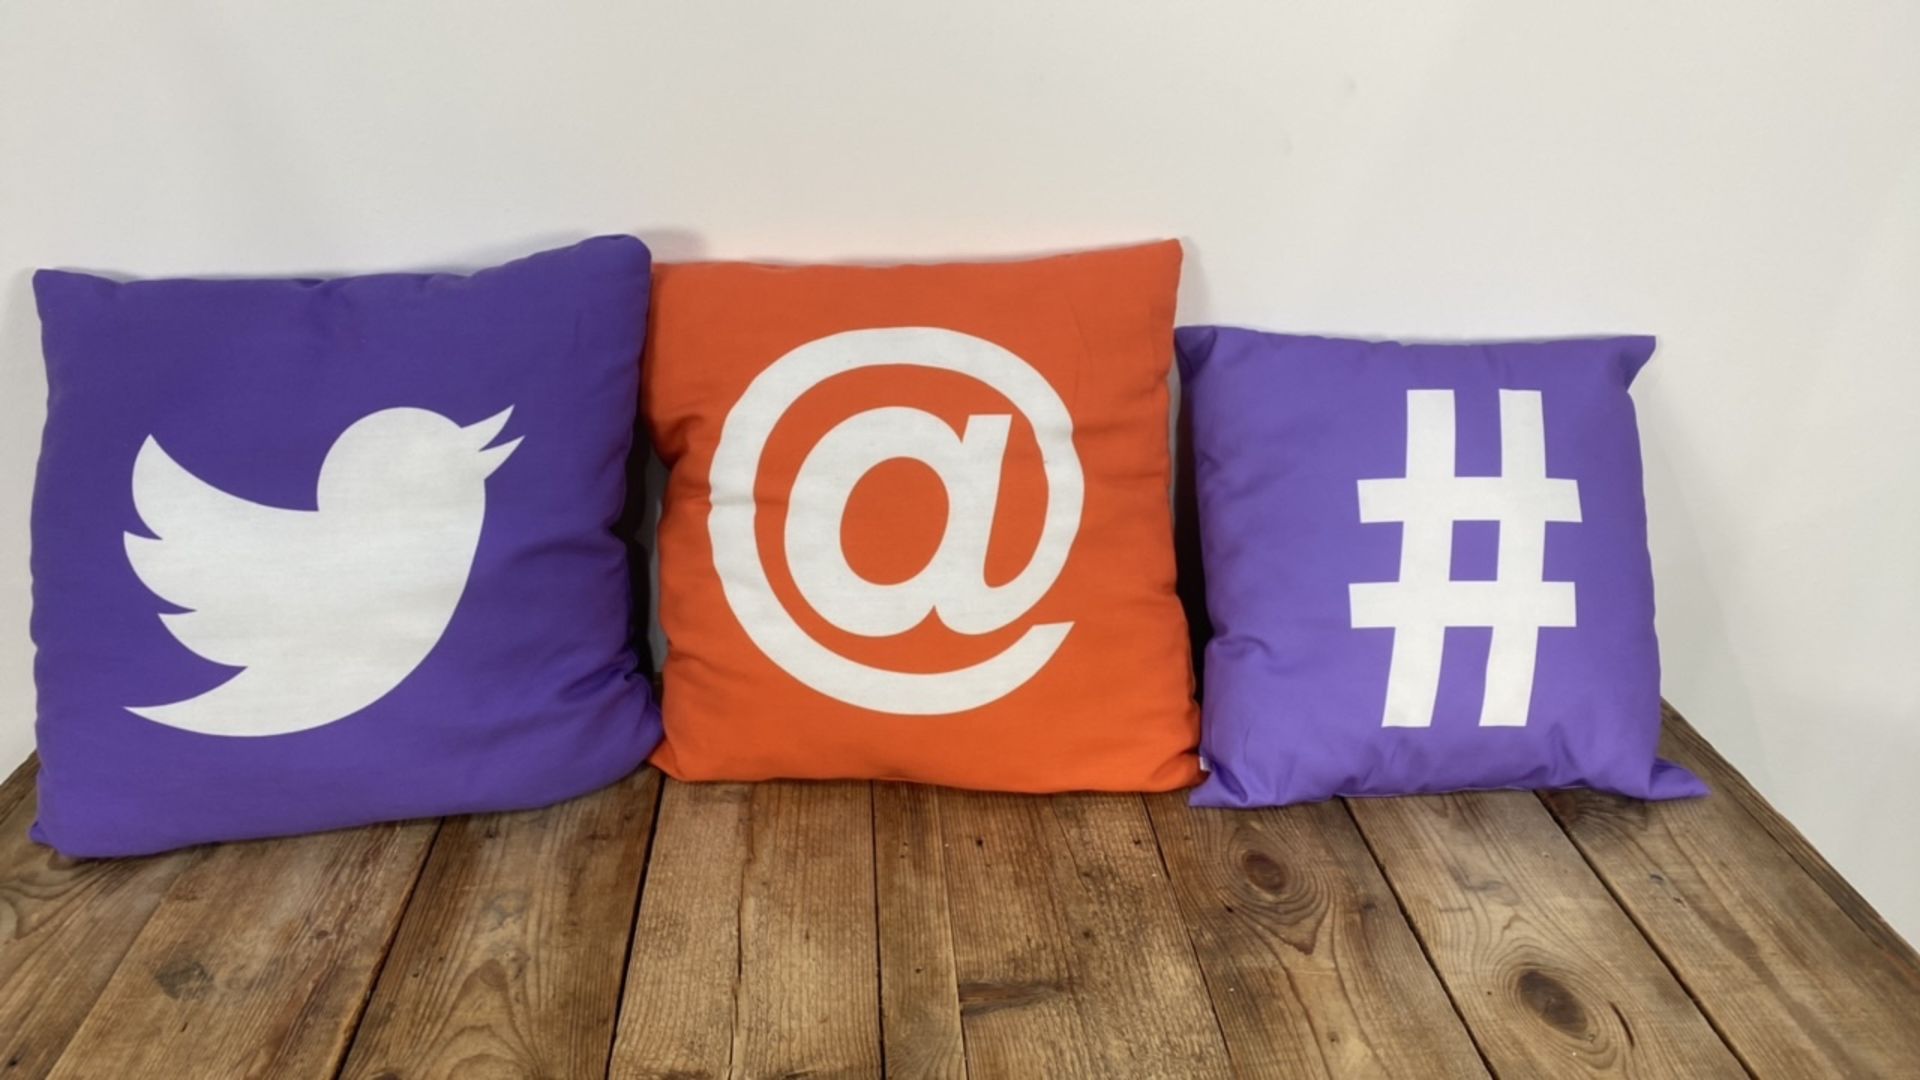 Twitter Cushions X3 - Image 2 of 3